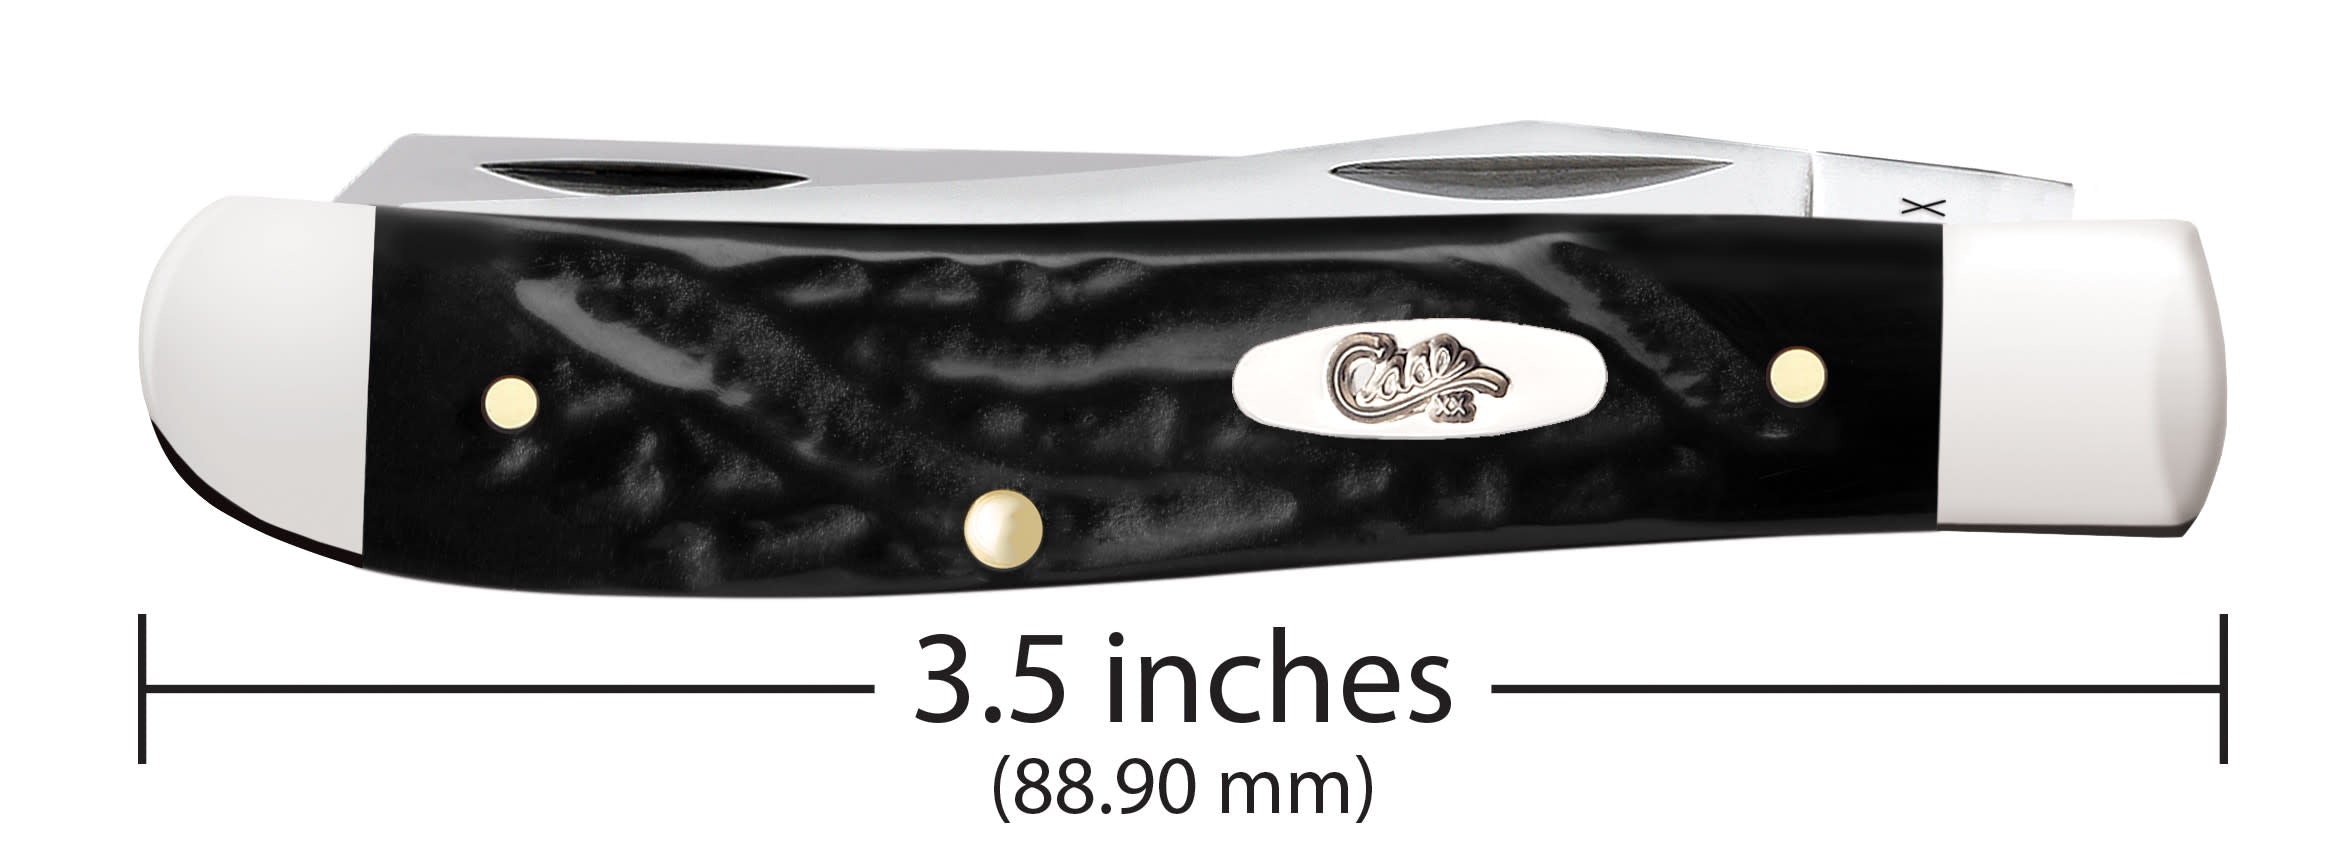 Jigged Rough Black® Synthetic Mini Trapper Knife Dimensions